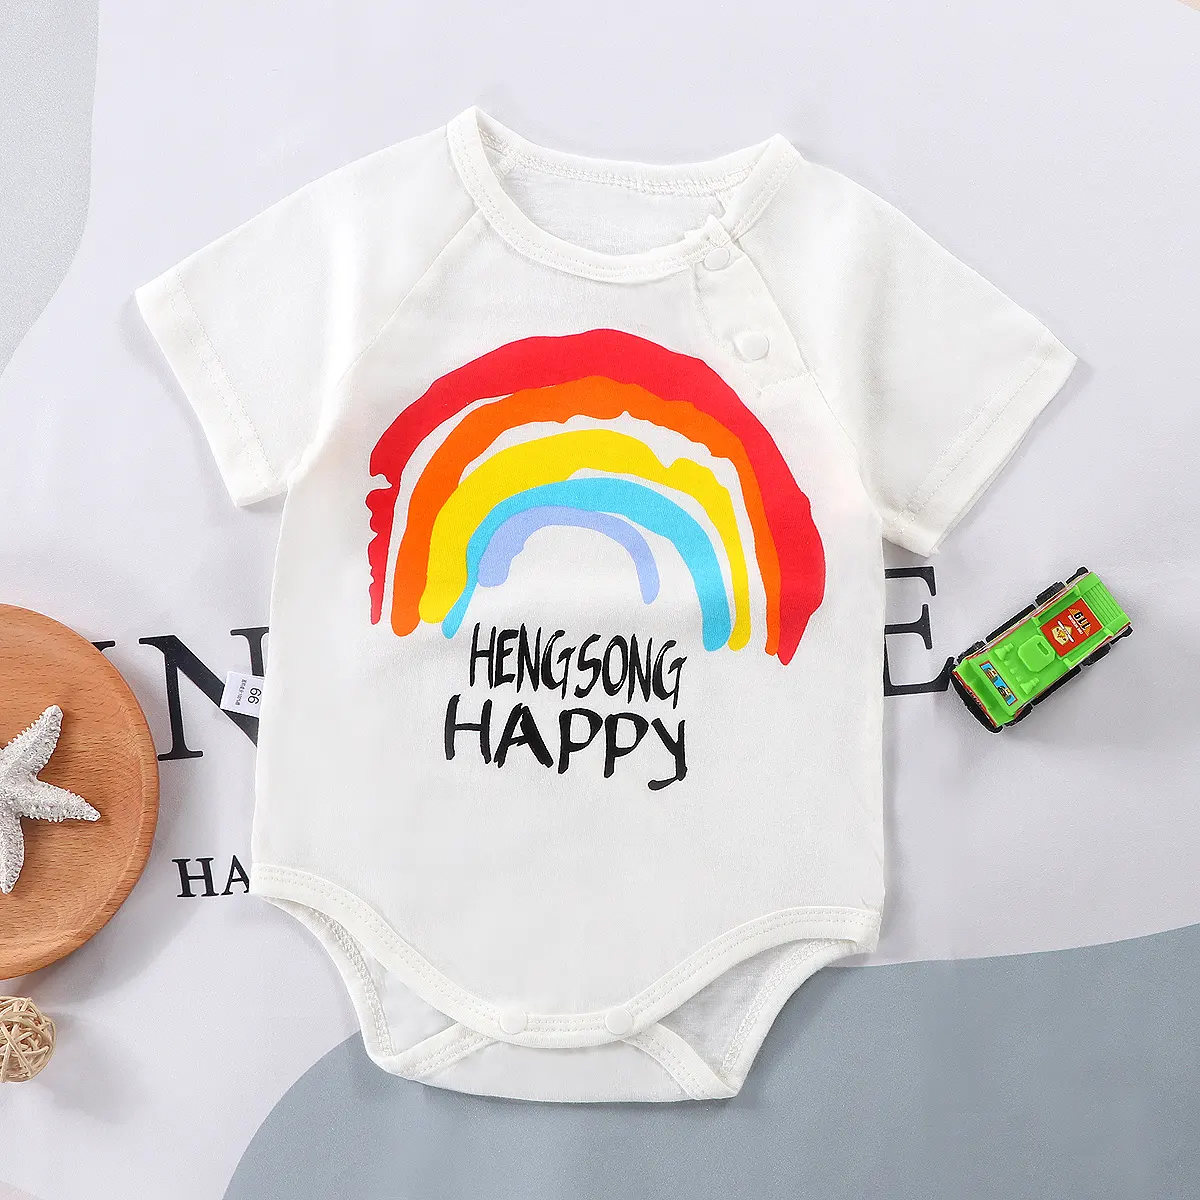 Baby Romper 1 Pieces Clothes 100% Cotton Snap Closure Outfits For Infant Short-Sleeve Bodysuits Toddler Stuff For 4 Seasons